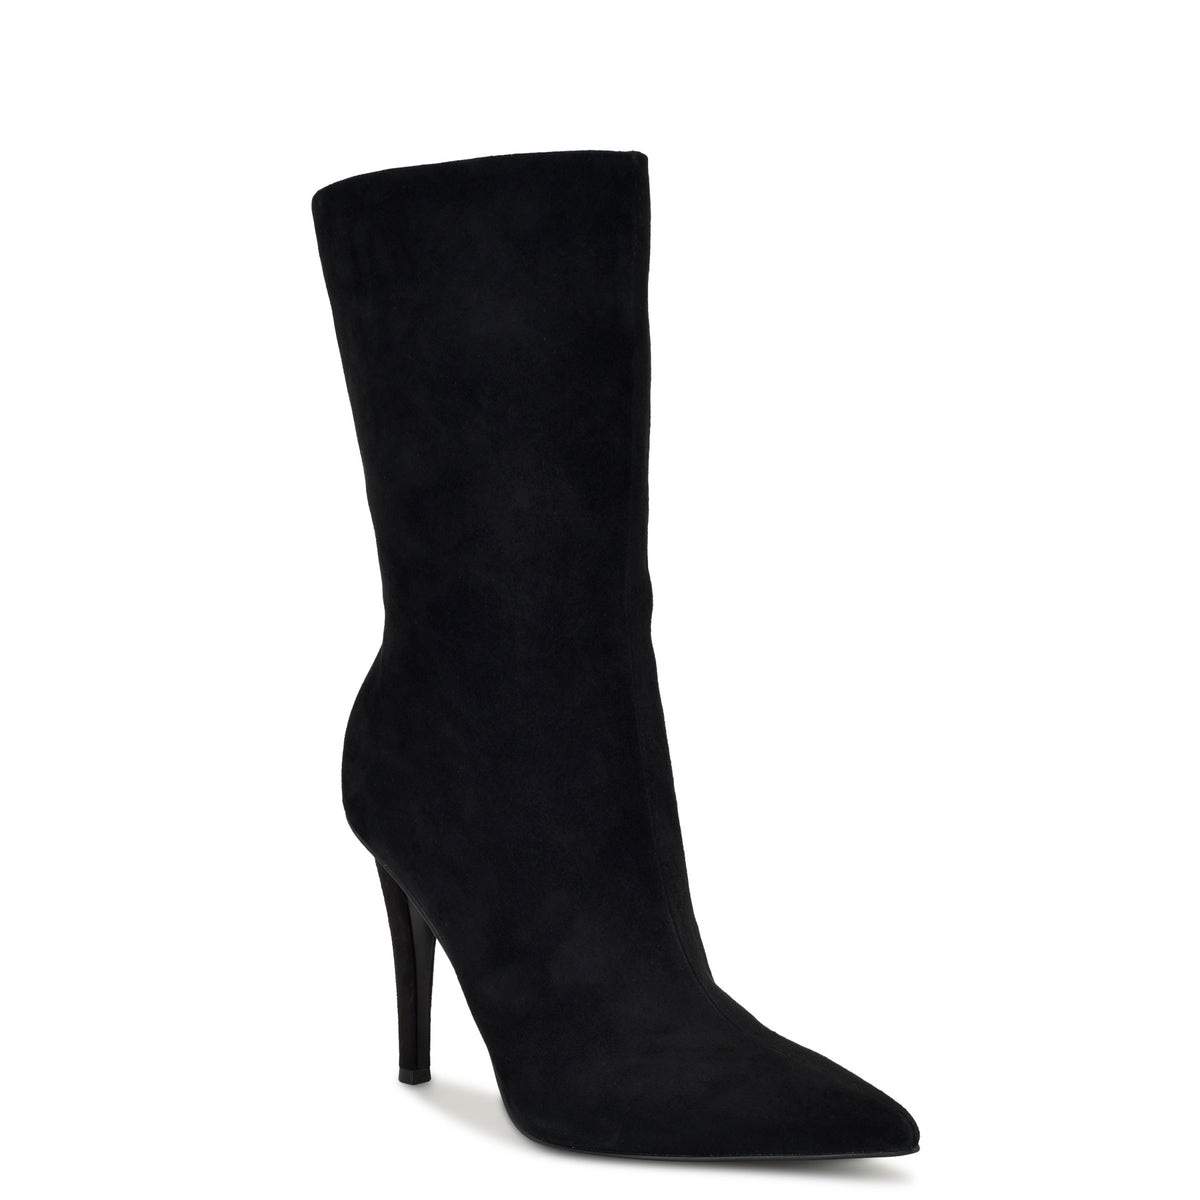 Frenchi Dress Booties